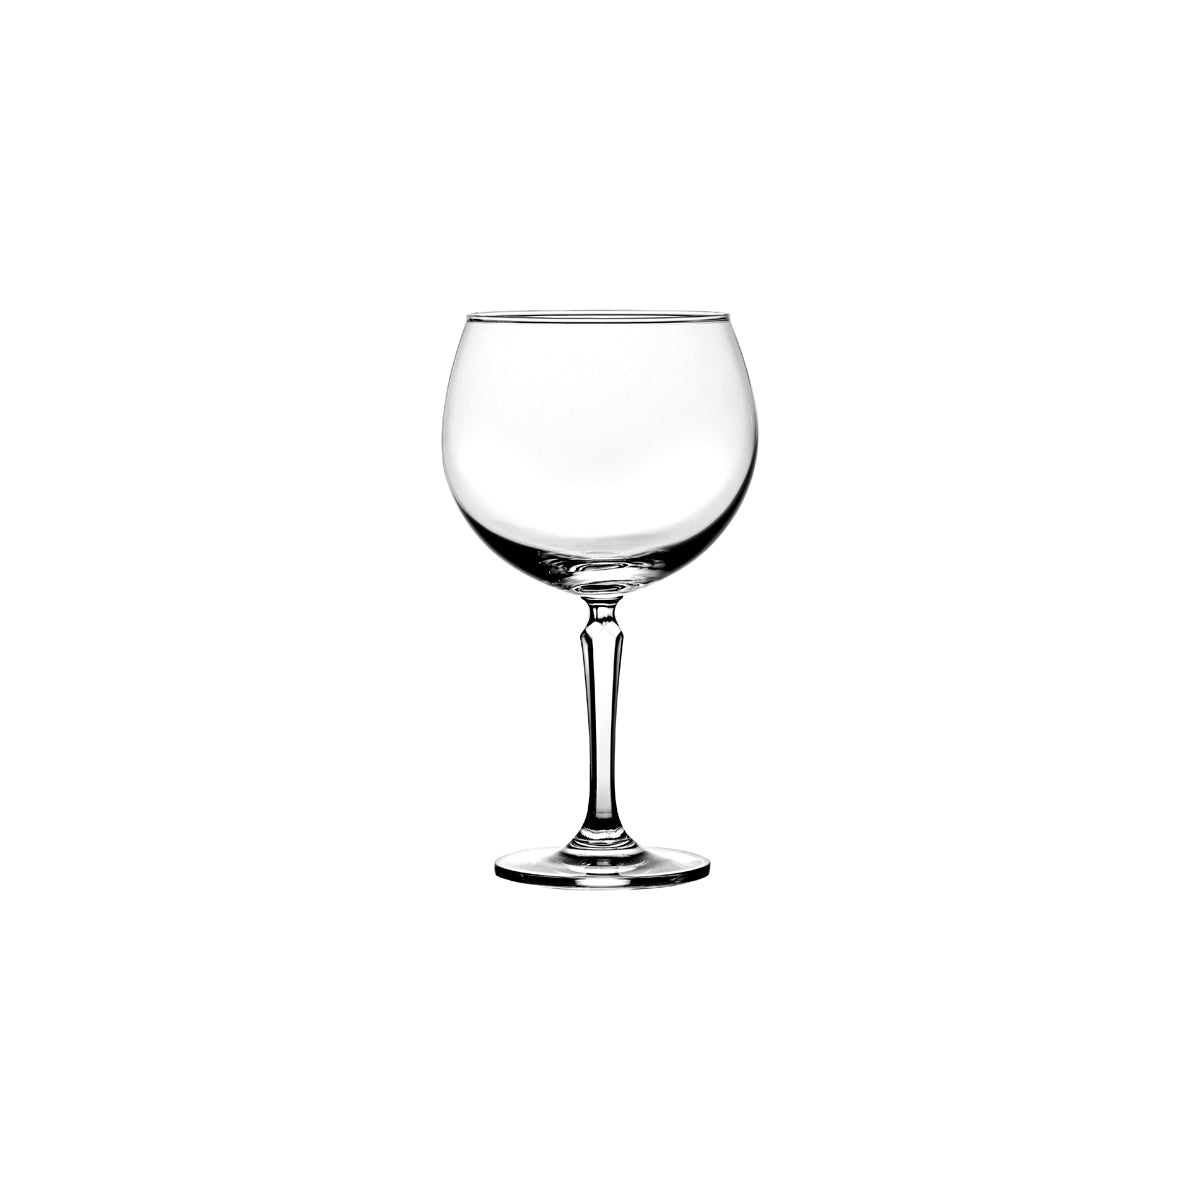 WLT60153 Wiltshire Salute Gin Glass 600ml 2 Pack  Tomkin Australia Hospitality Supplies